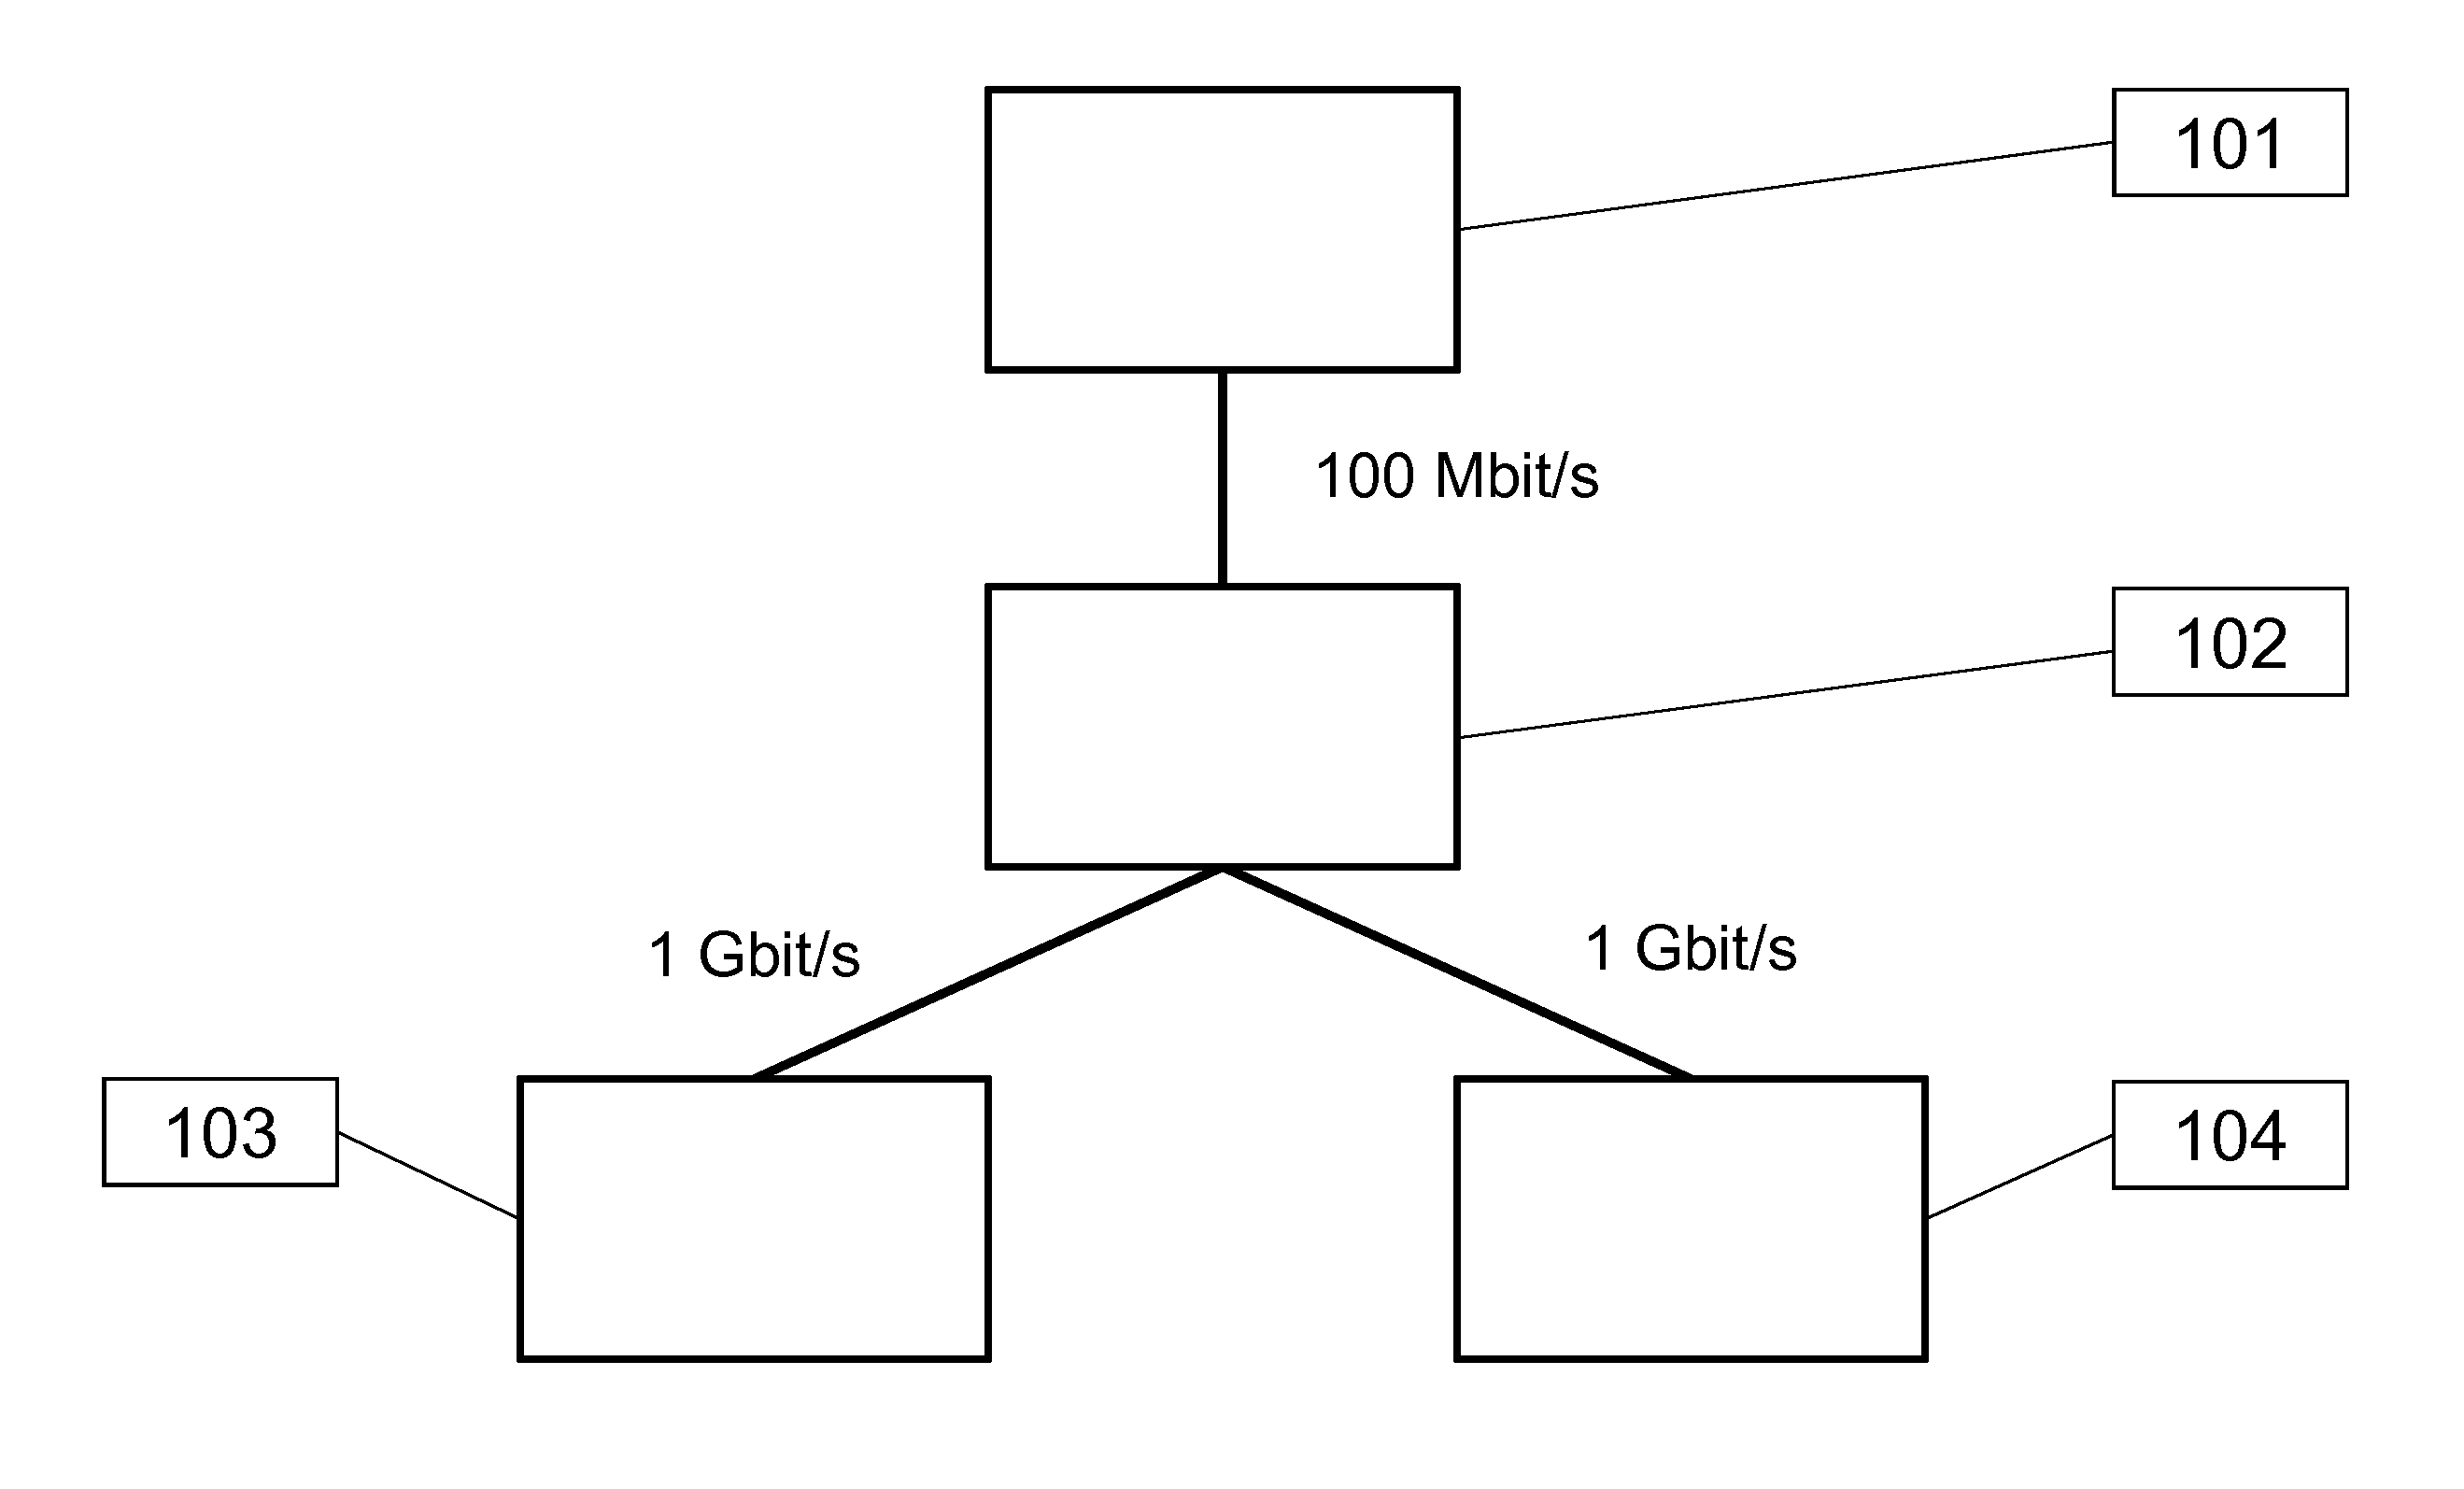 Probe Routing in a Network